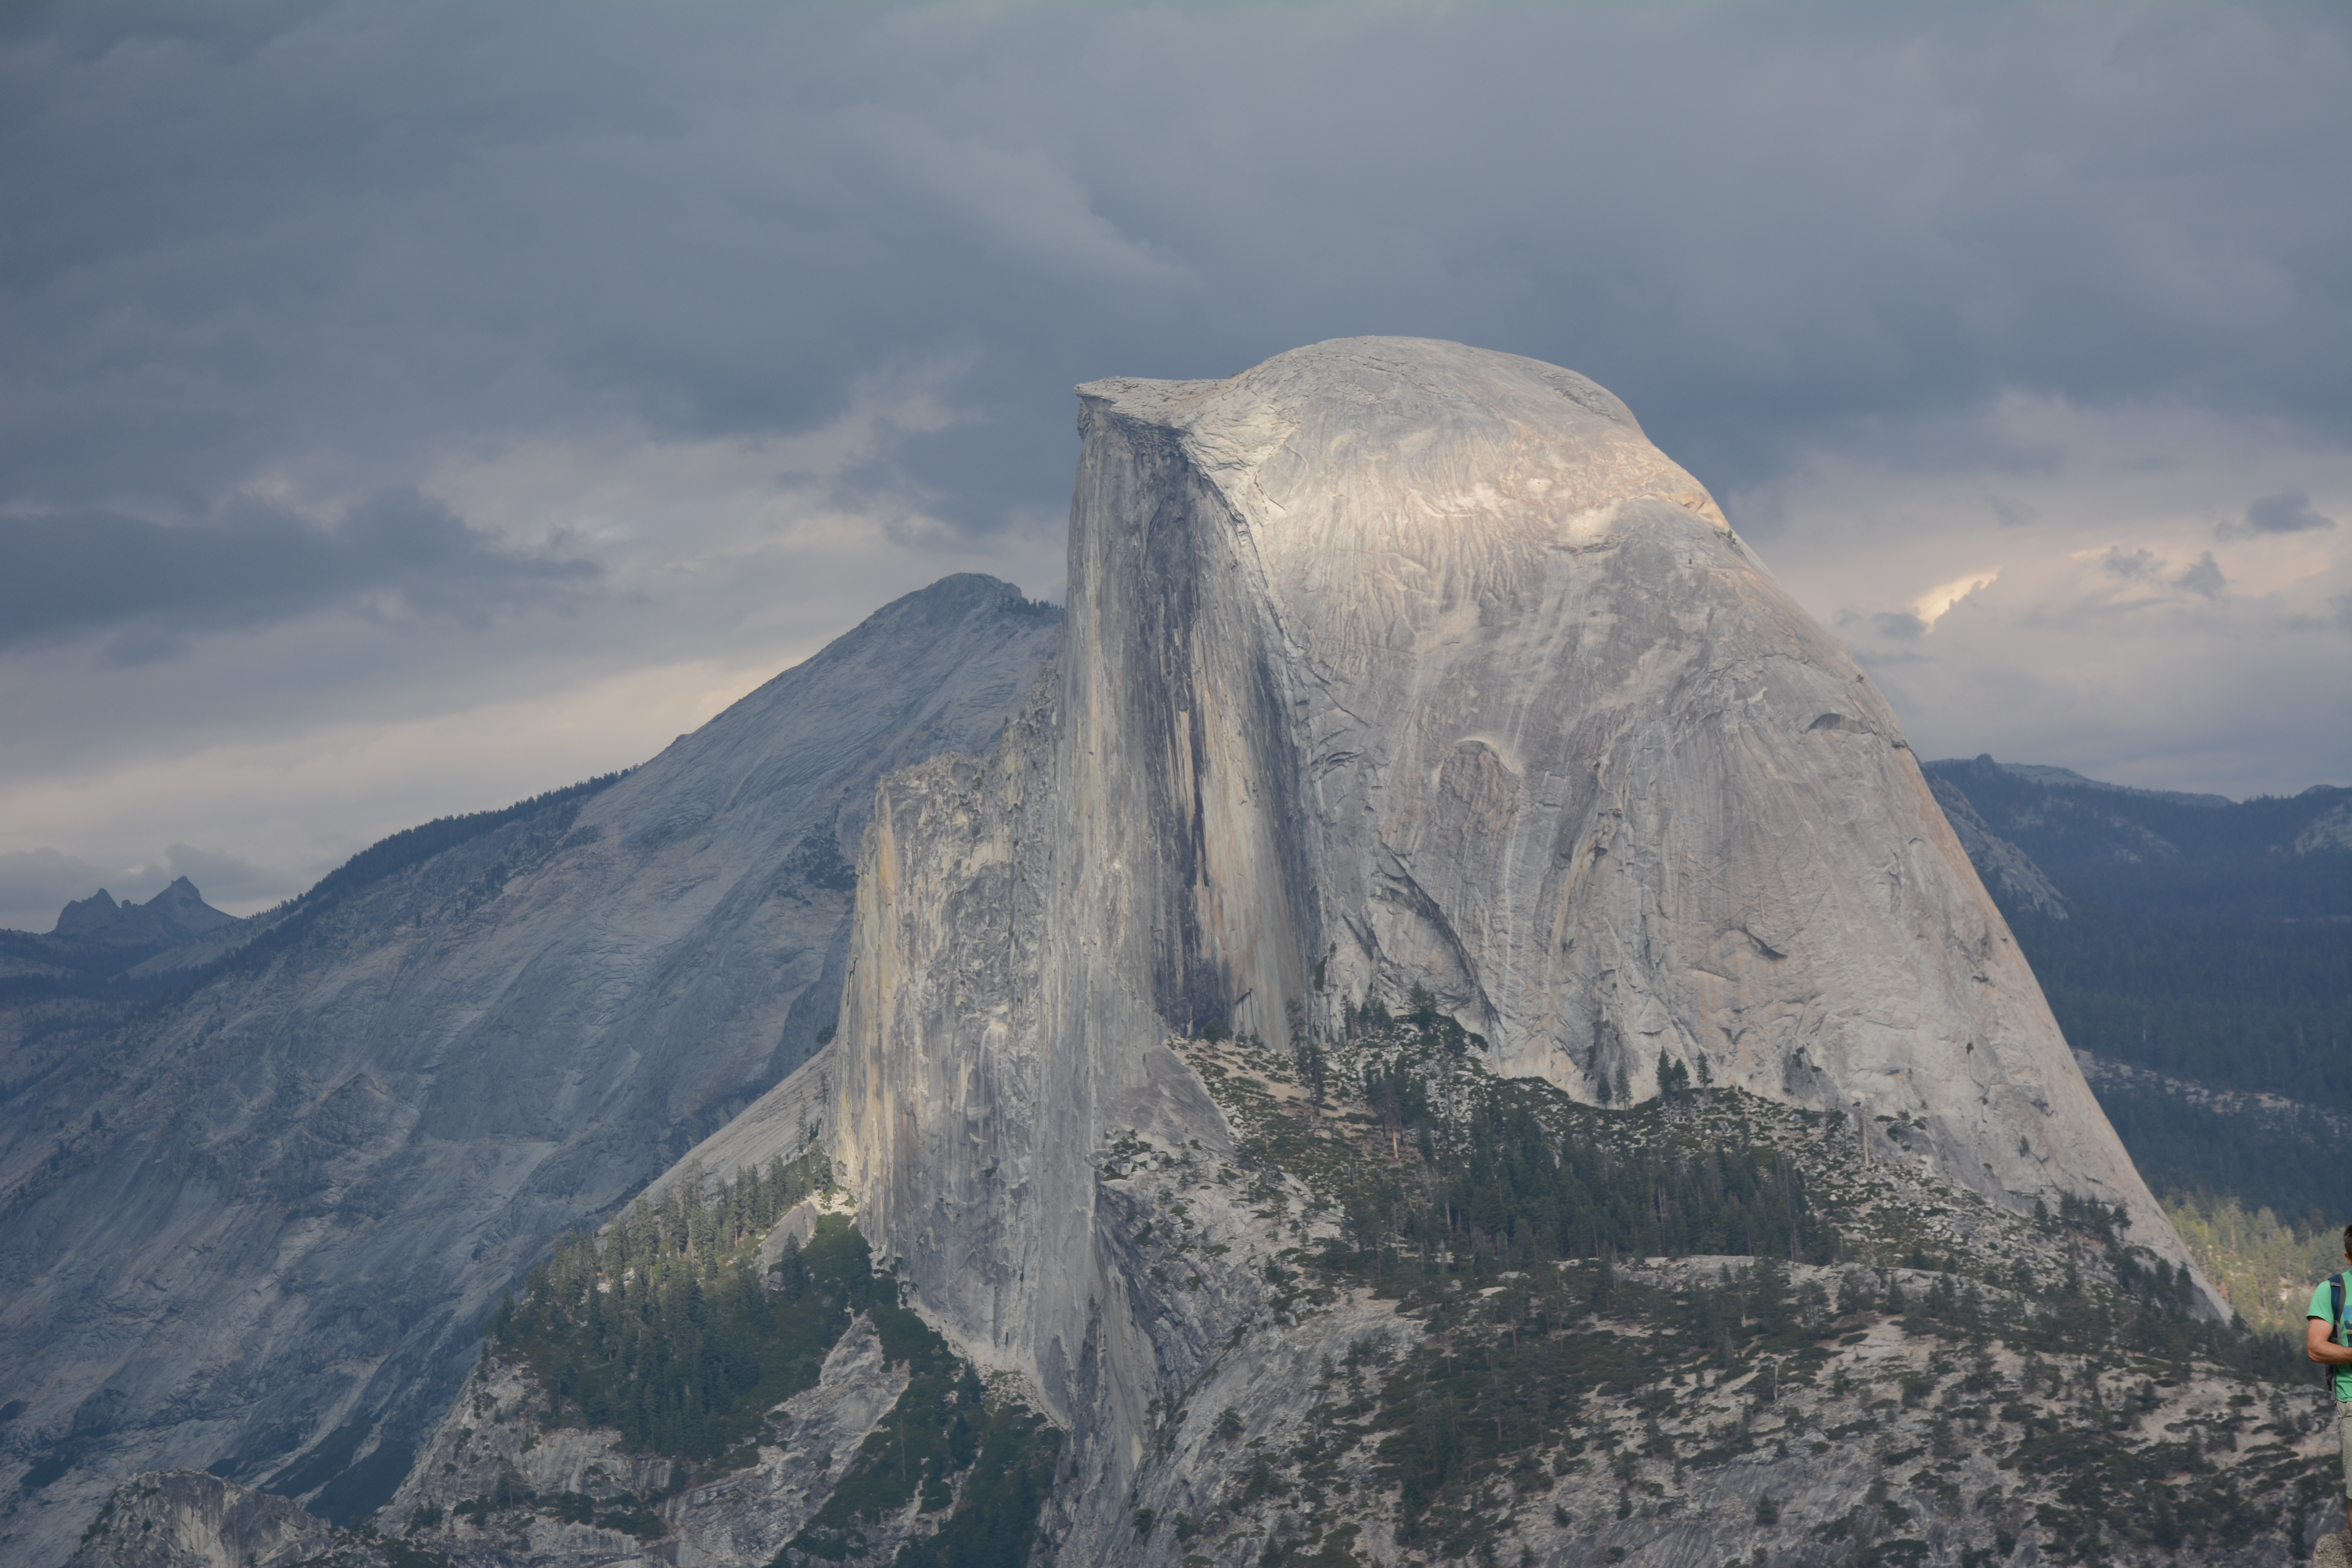 Yosemite….Words Just Can’t Express